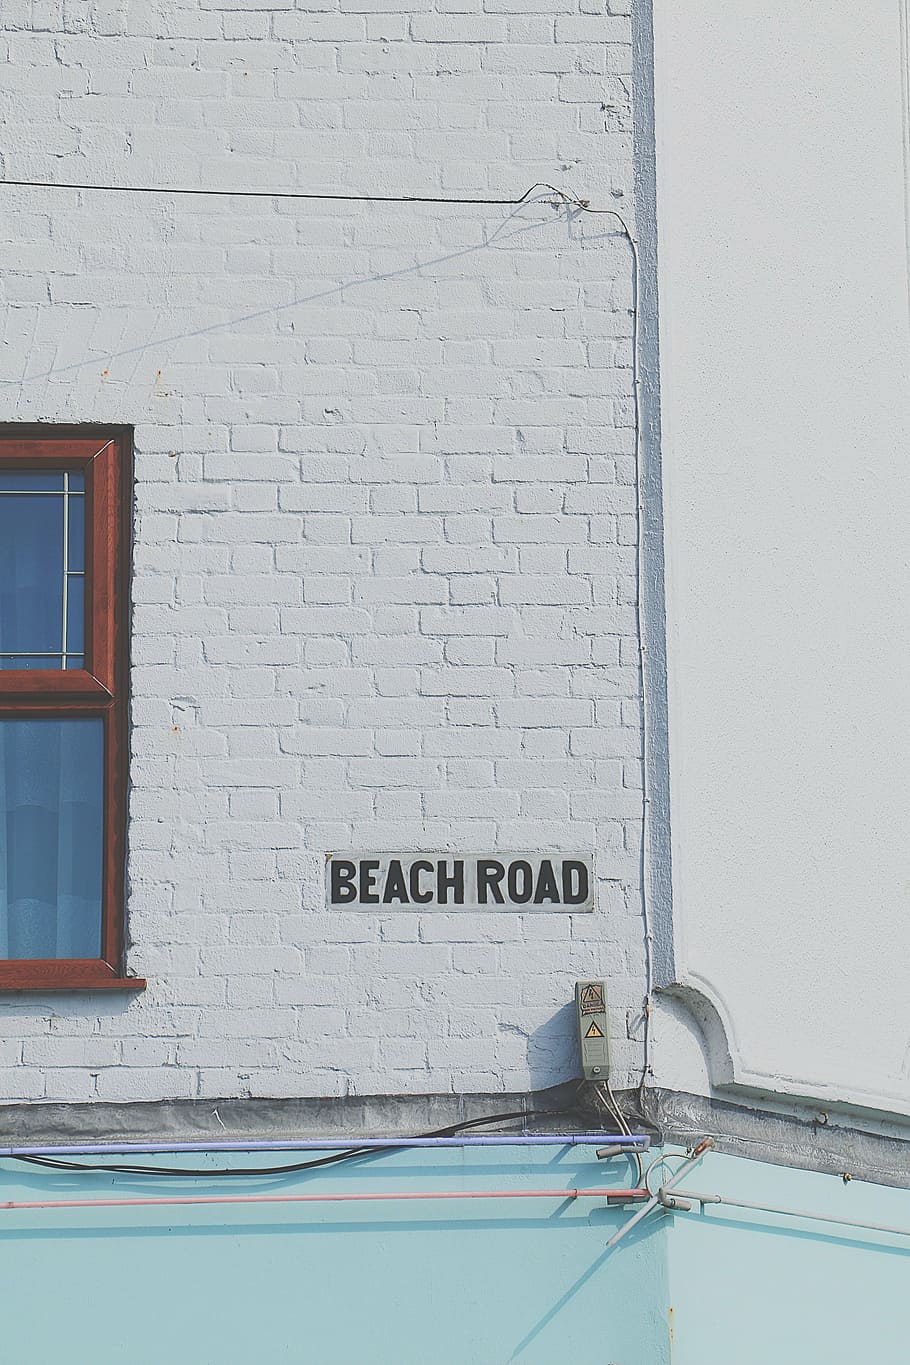 beach road wall signage, architecture, building, structure, wall, window, electrical, wiring, roof, text